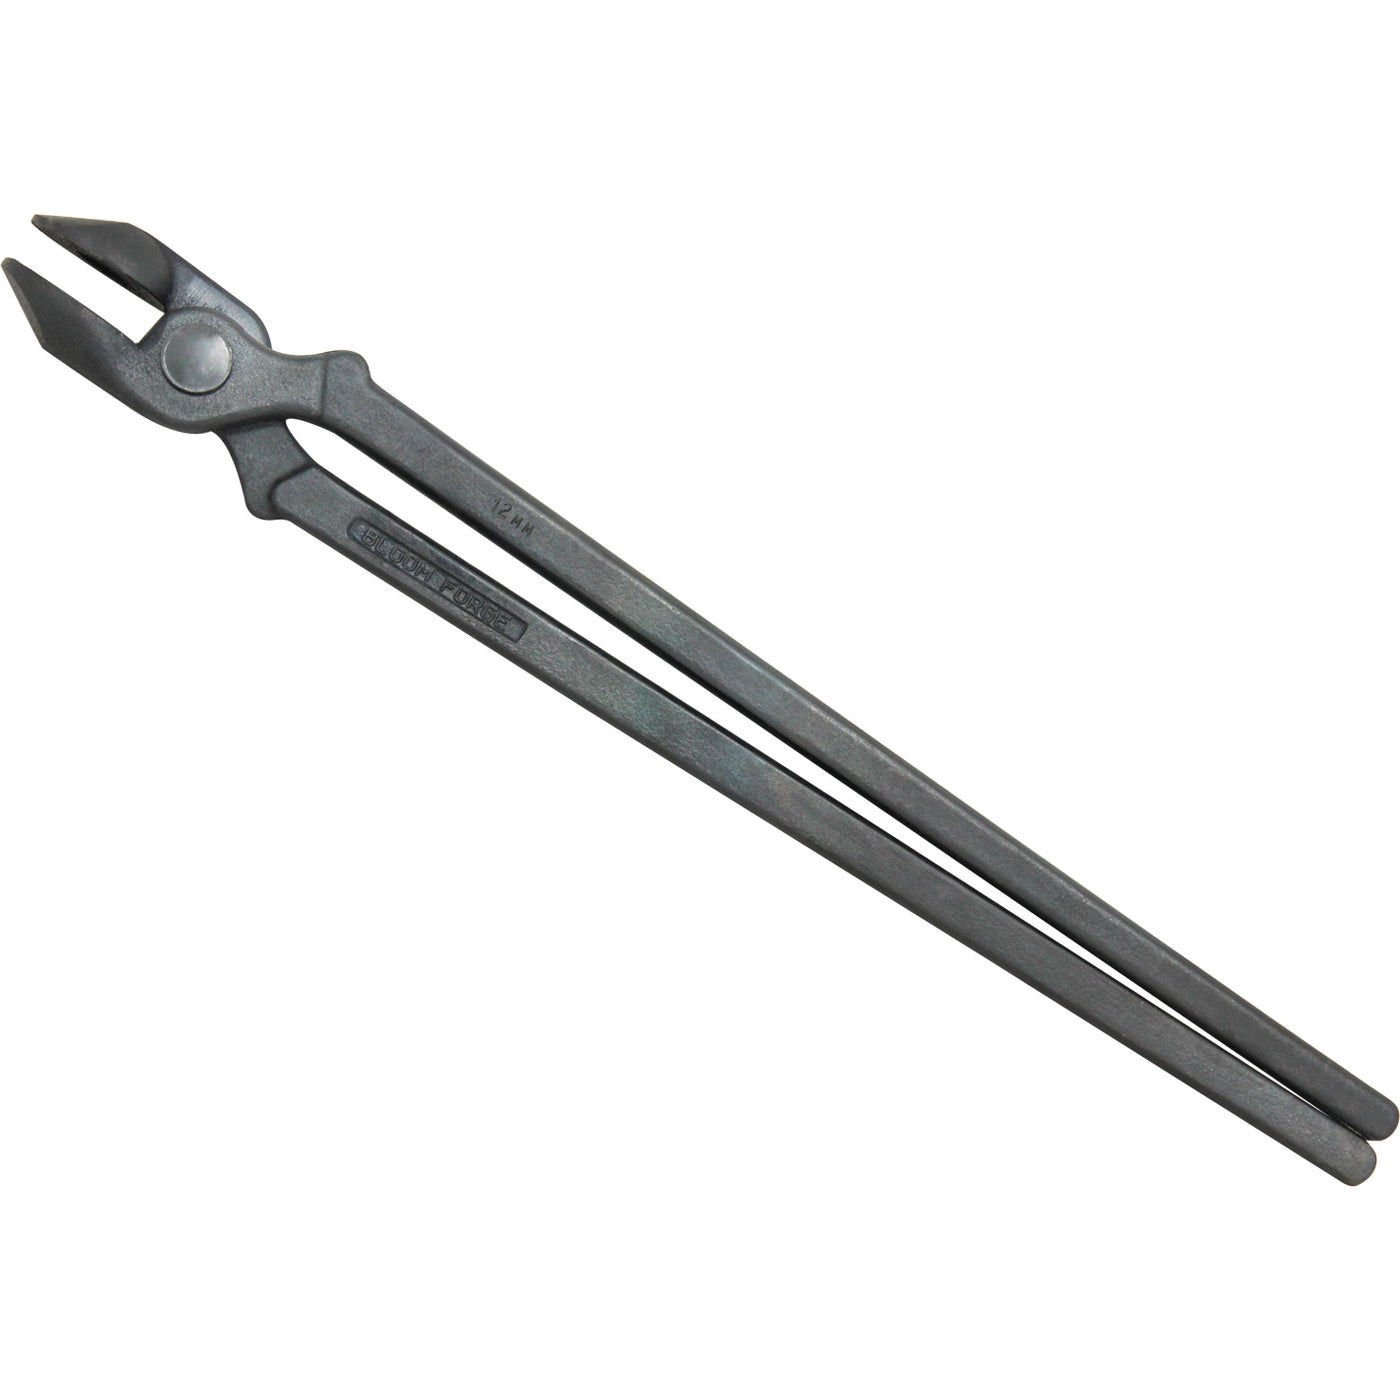 Bloom Forge Tongs 10mm